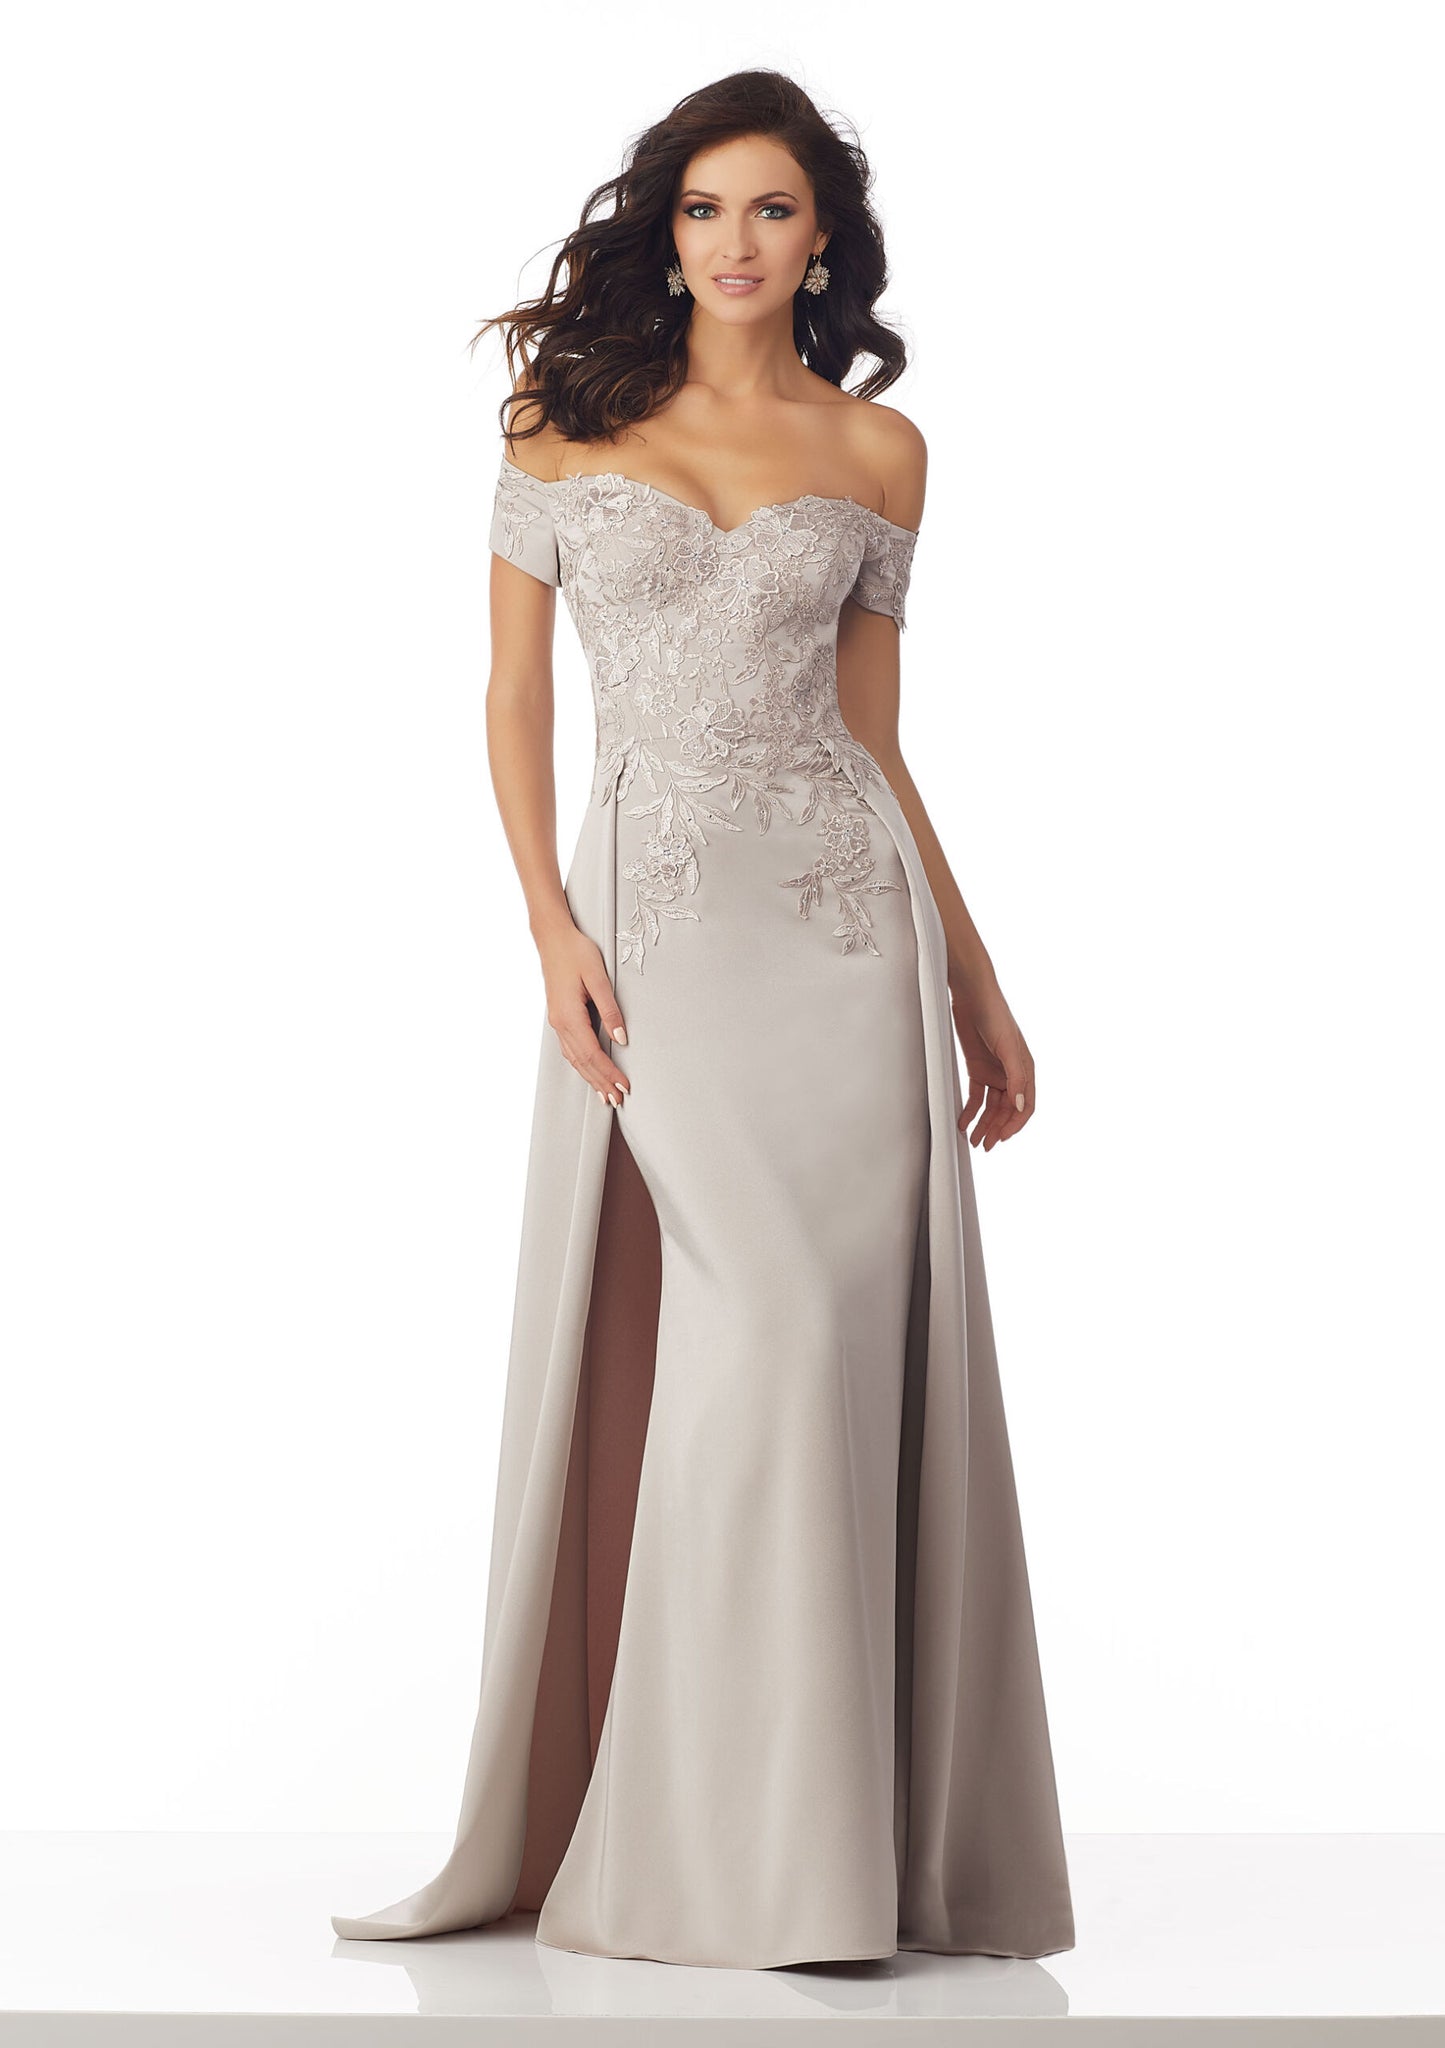 Stretch Crepe Evening Gown With Beaded Lace Appliqués On Bodice Morilee